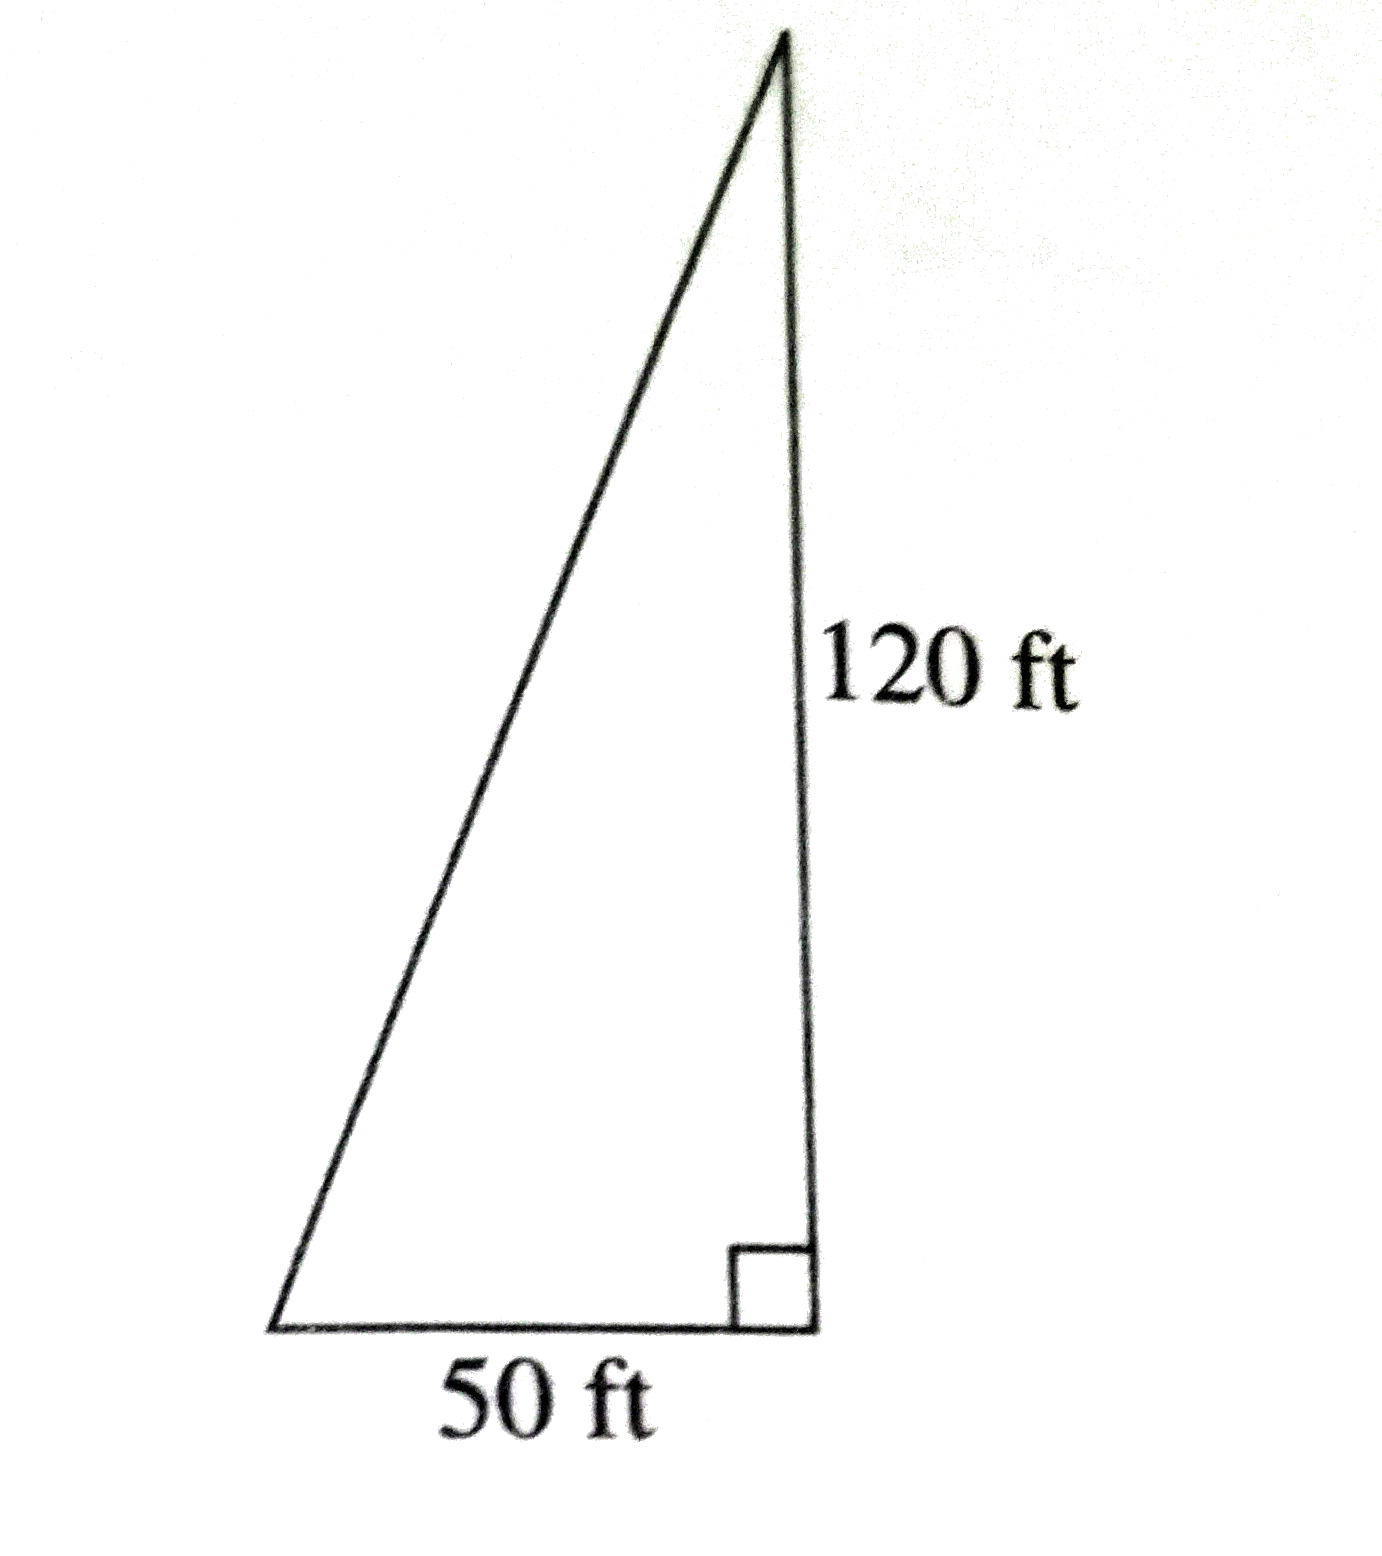 Greg is making a triangular sail for a boat , shaped like a right triangle and shown below .      Sail material costs $8.99 for 150 square feet . If the material can be purchased in any quantity , which of the following is closest to the cost in dollars of the material needed to fill the area of the sail as shown ?